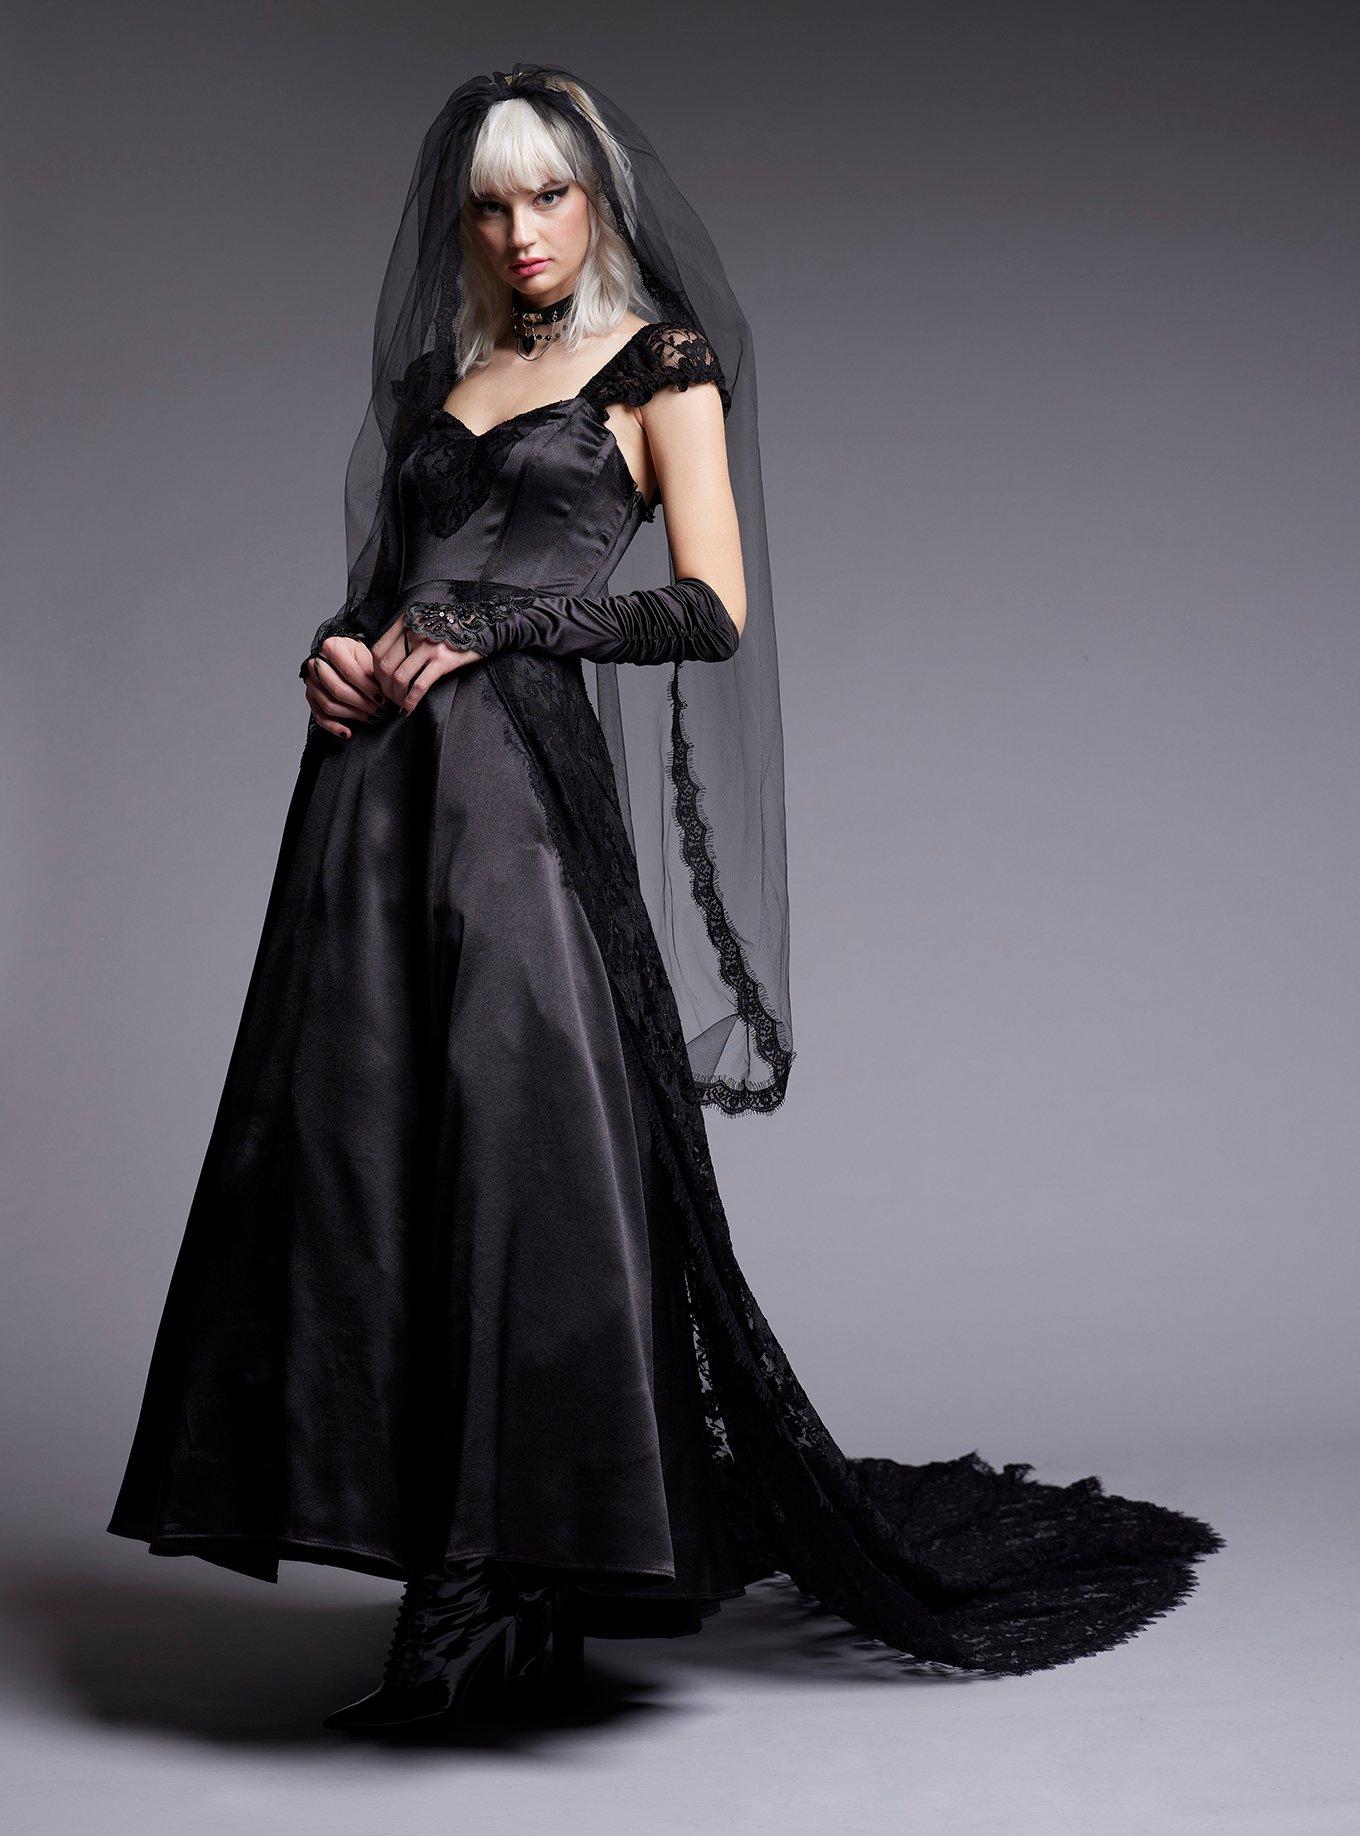 Black Lace Gothic Special Occasion Dress Limited Edition